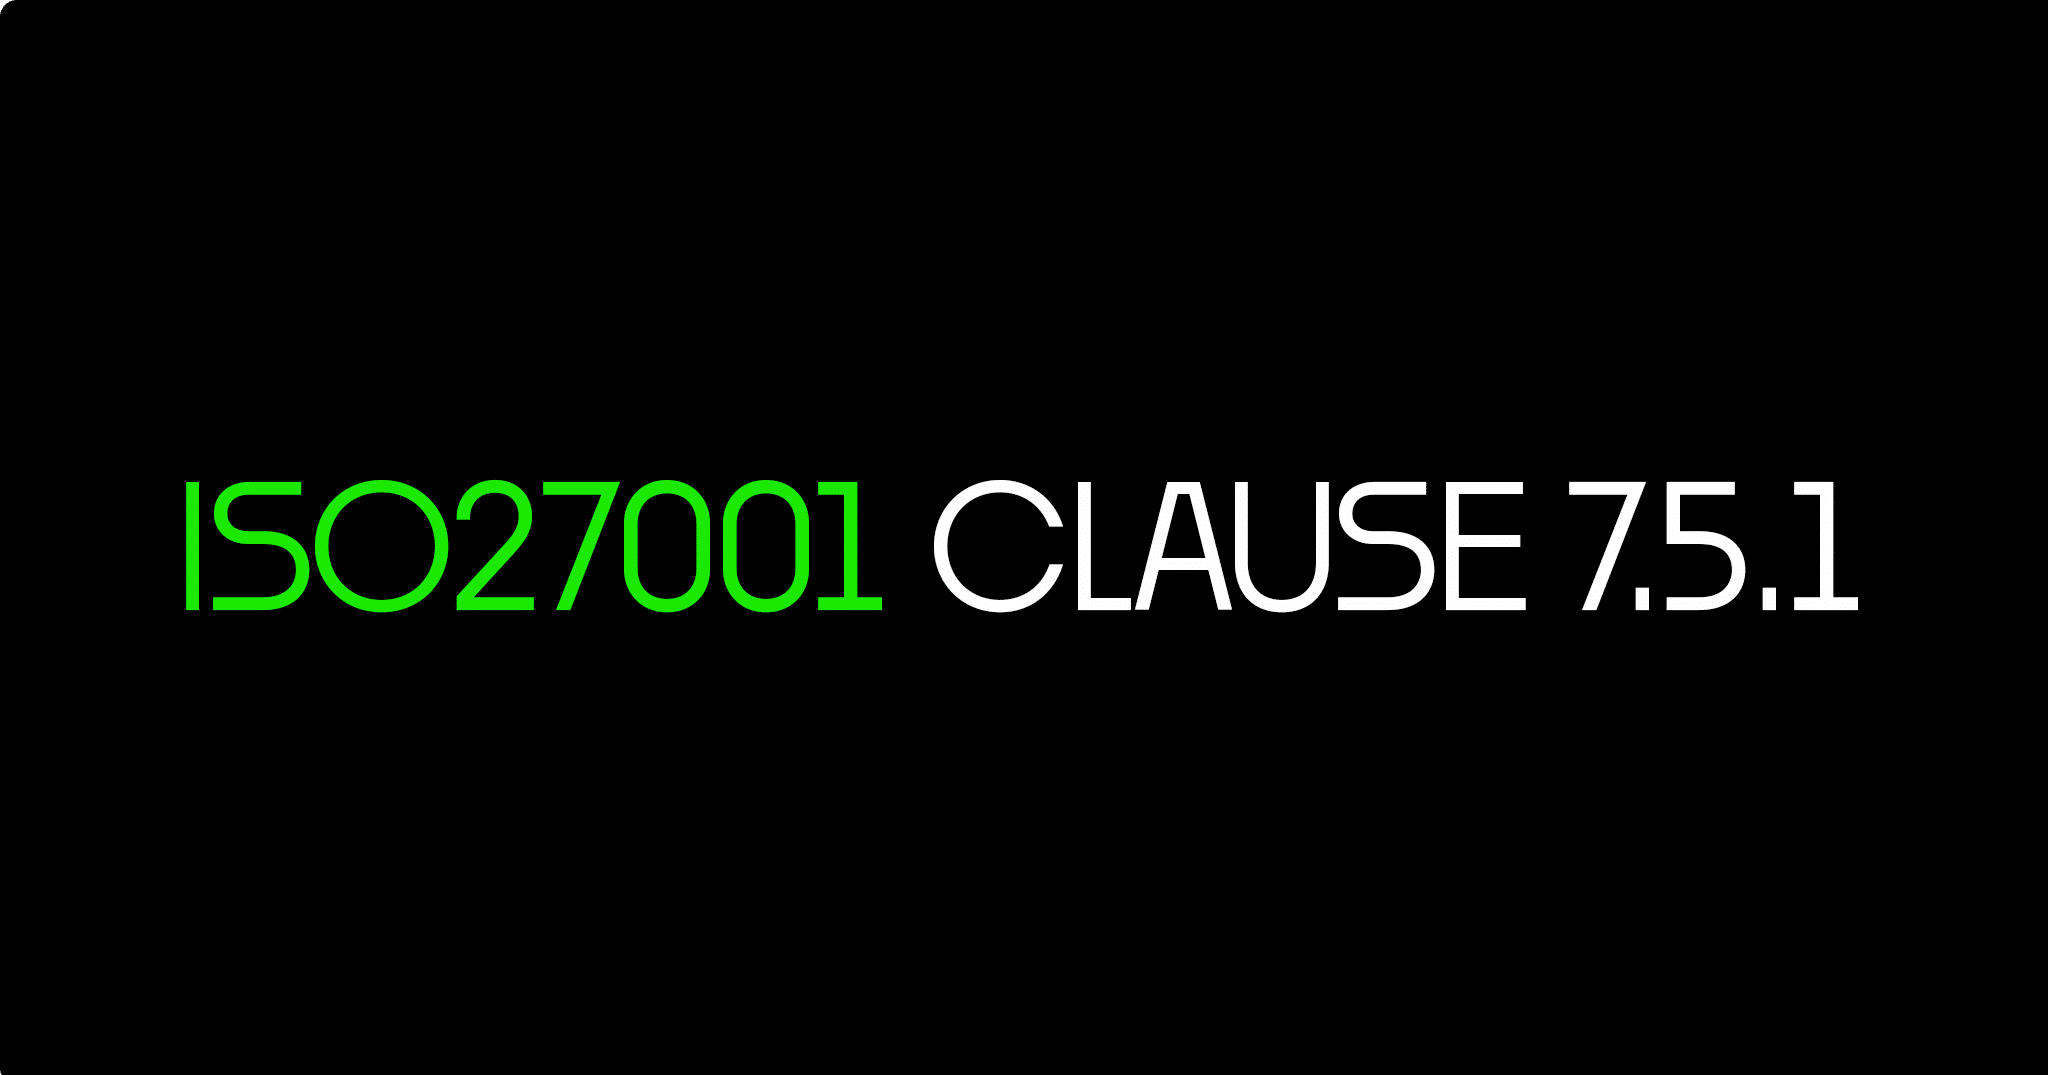 ISO 27001 Clause 7.5.1 Documented Information Certification Guide